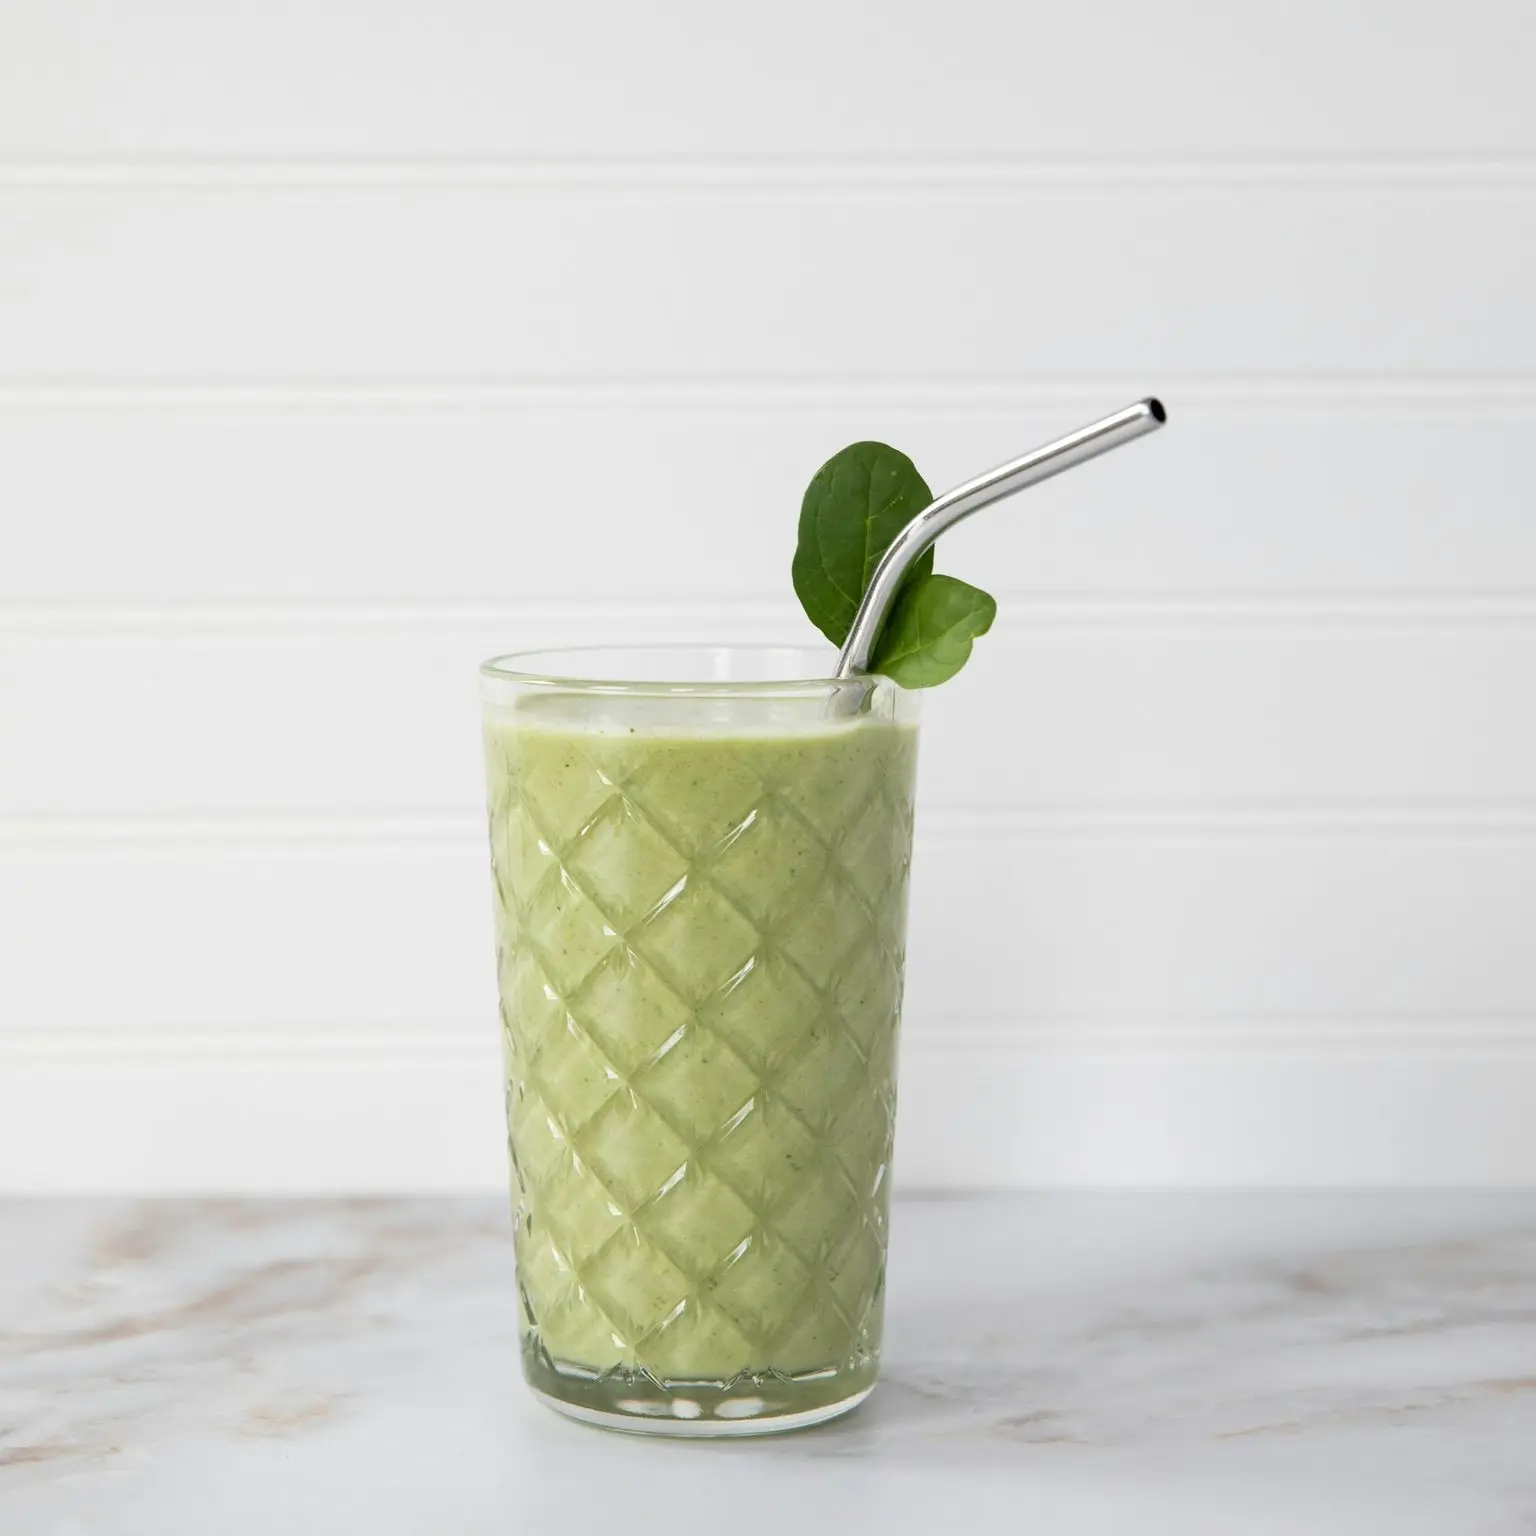 green and white drink with straw in clear drinking glass